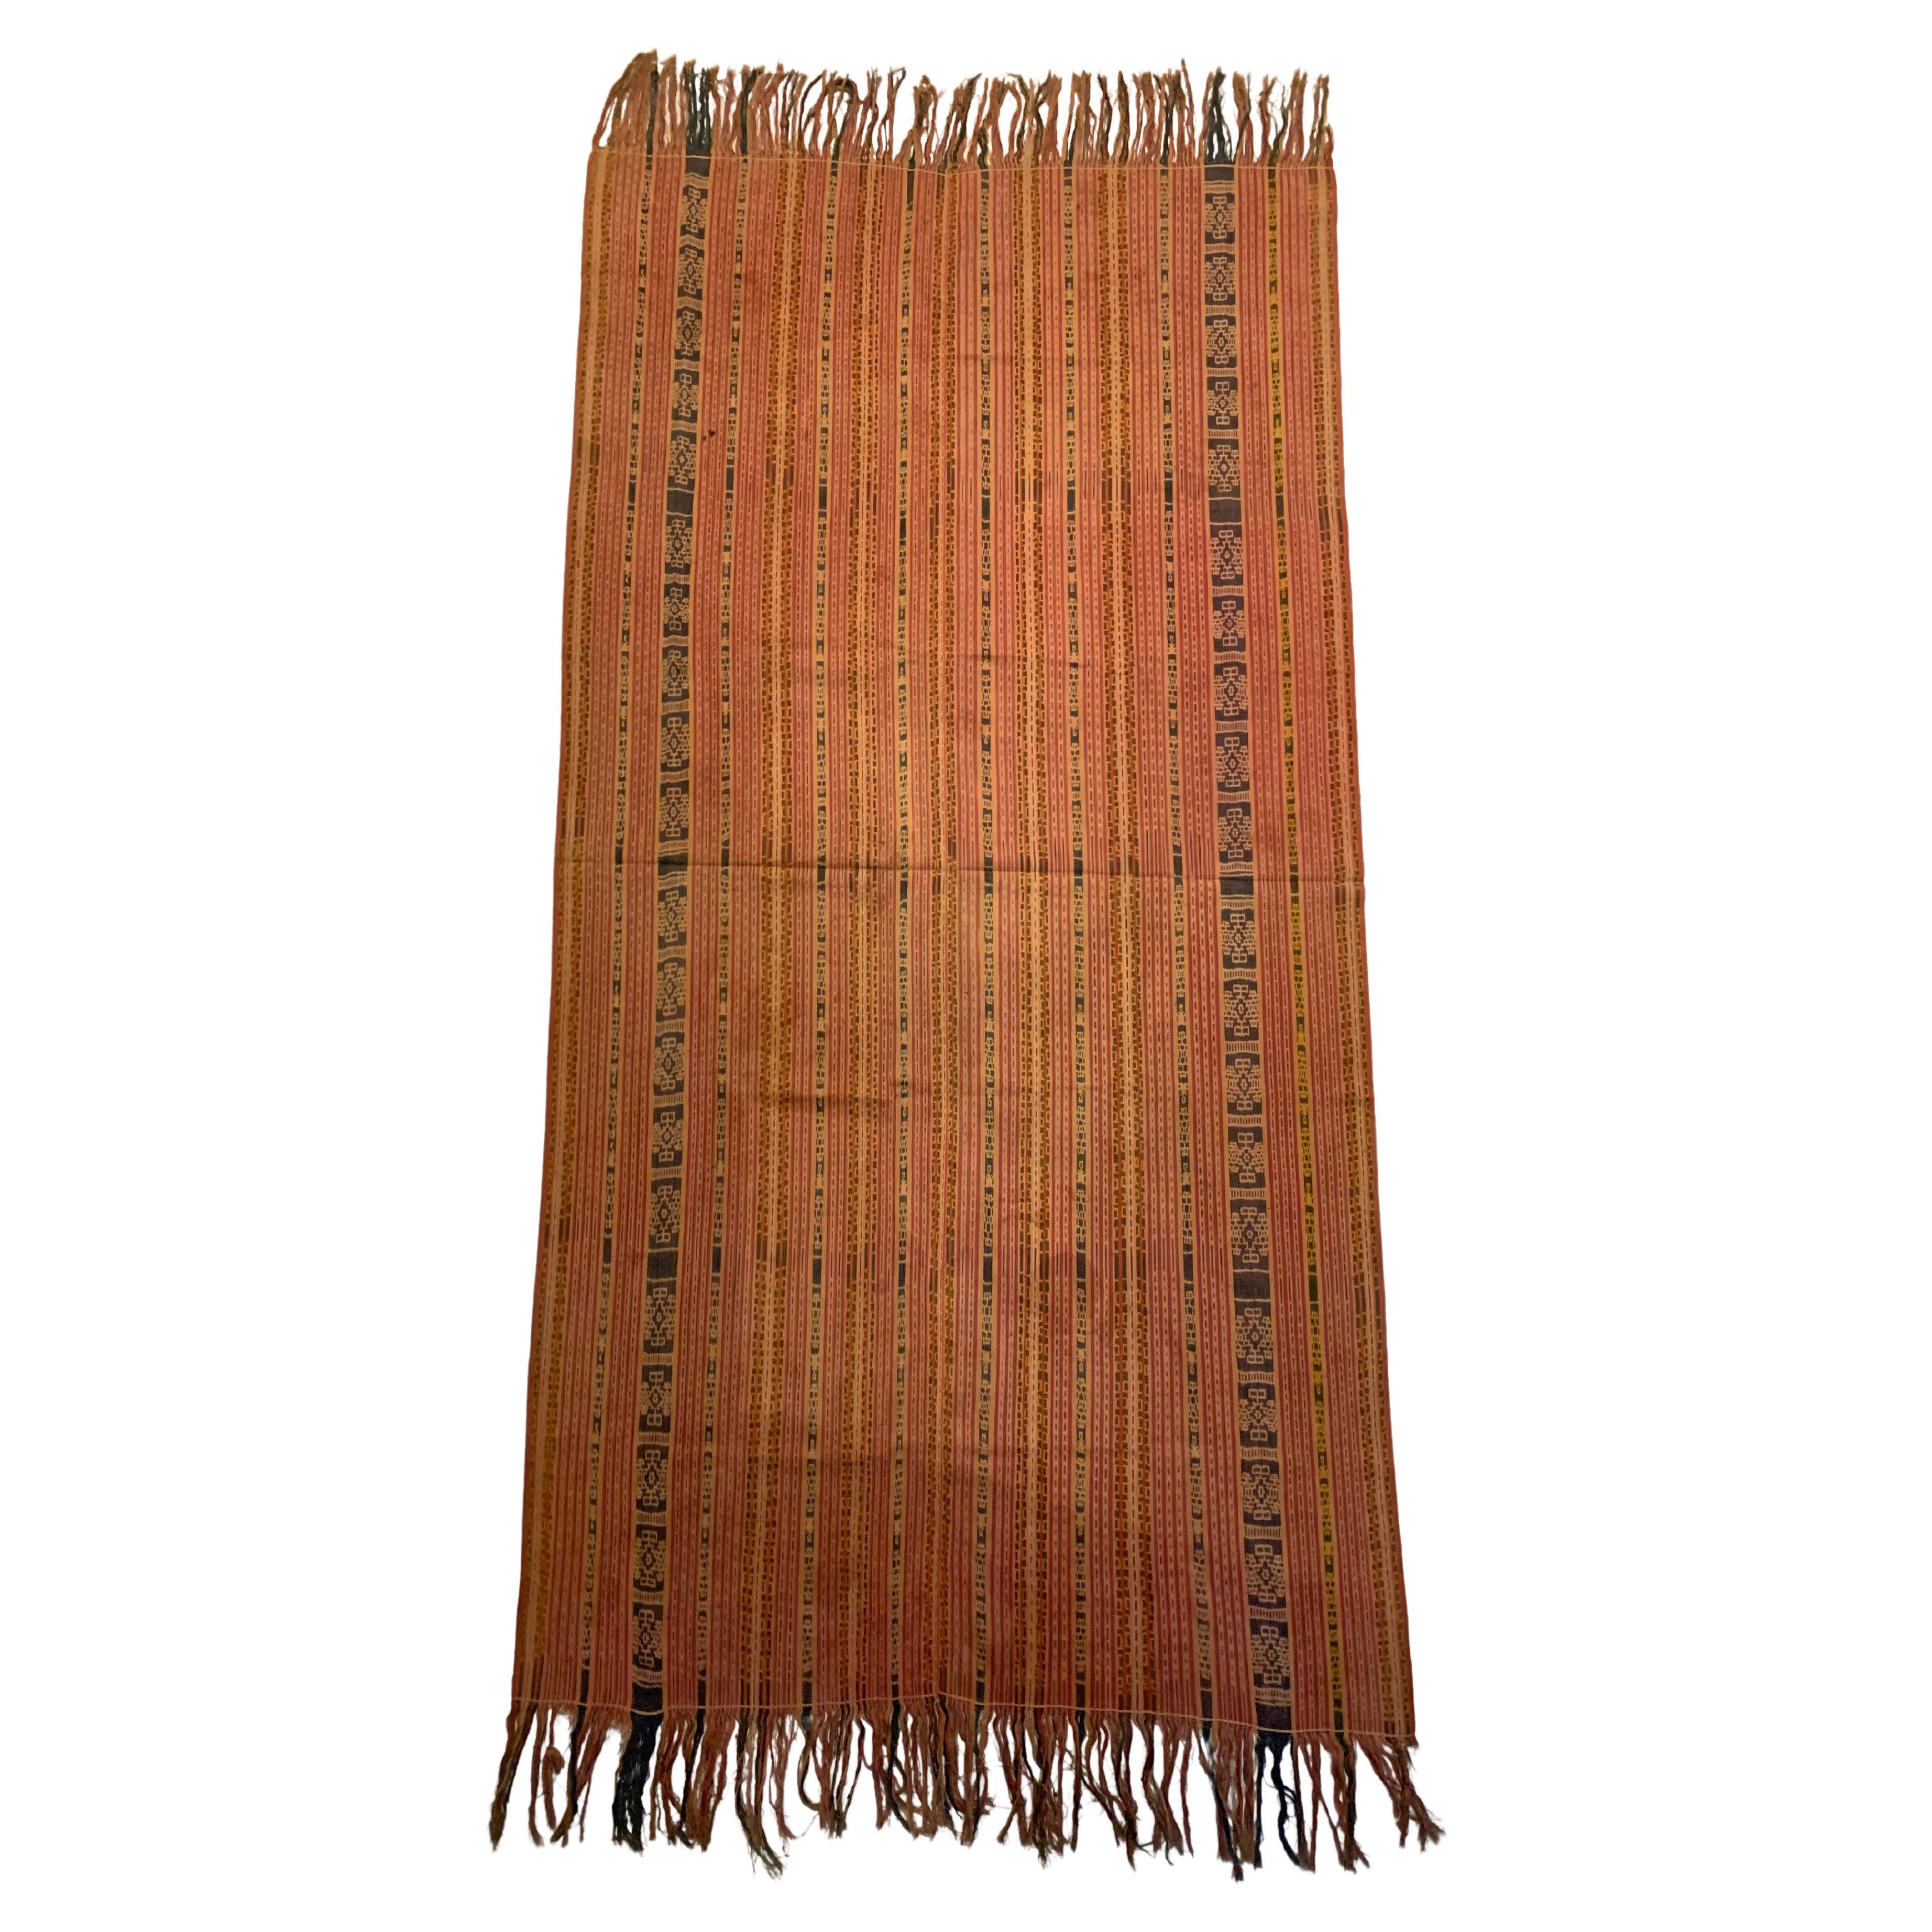 Rare Ikat Textile from Timor Stunning Tribal Motifs & Colors, Indonesia c. 1900 For Sale